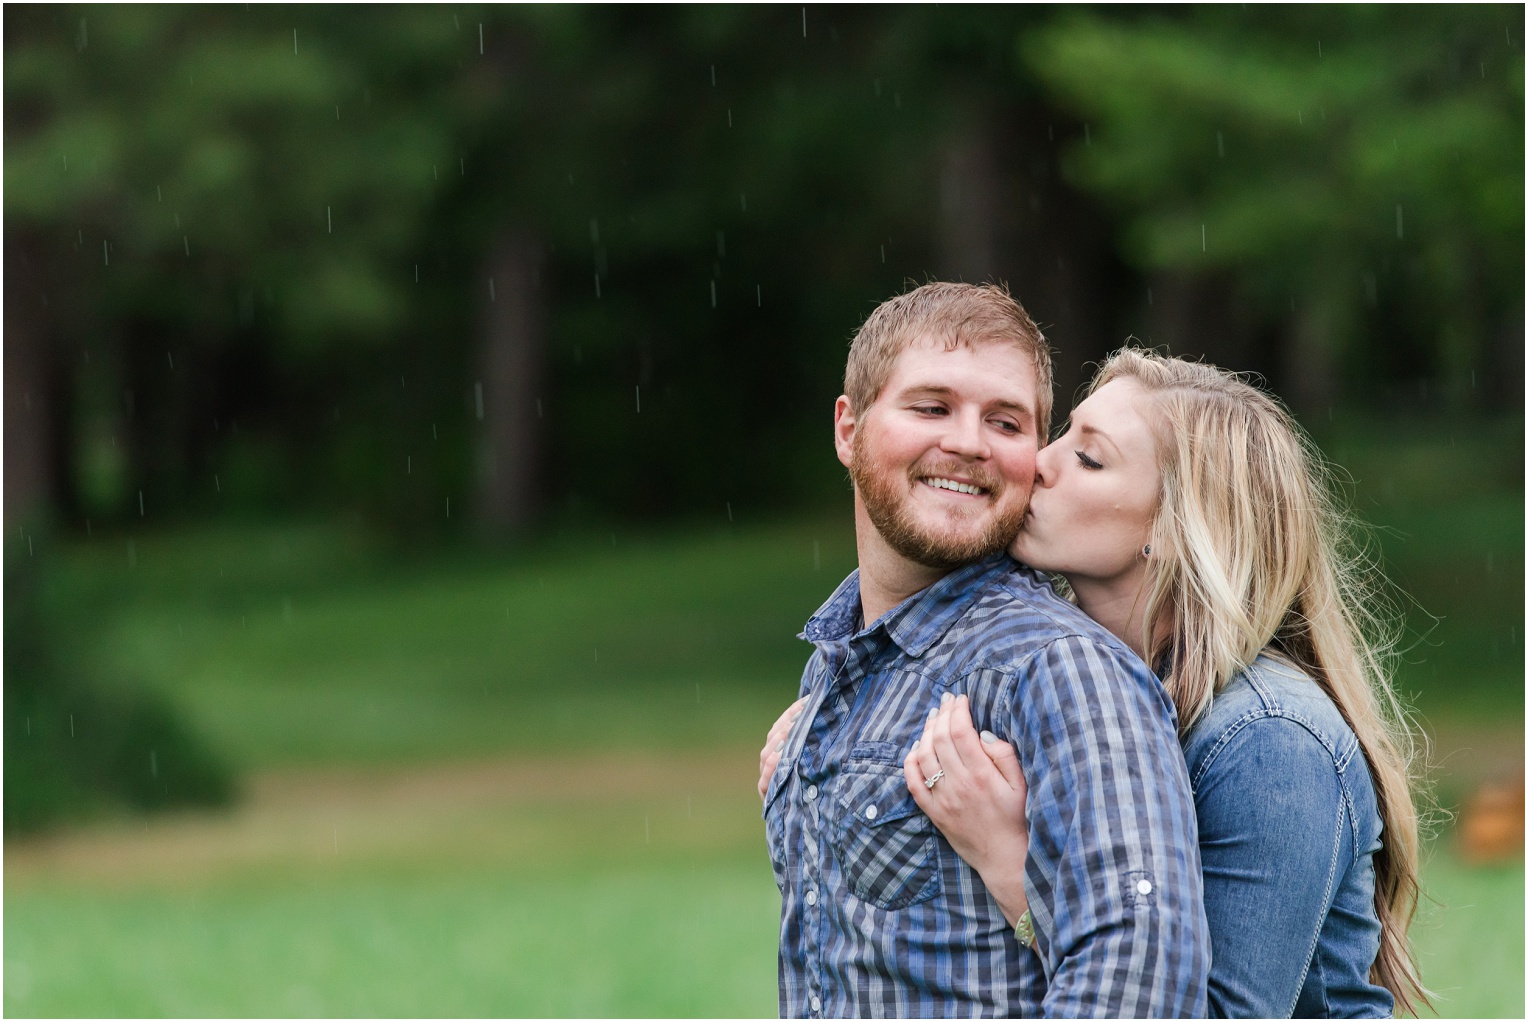 Engagement shoot with horses Elk Haven Equestrian Center Engagement Session Cle Elum WA Adam and Jessica